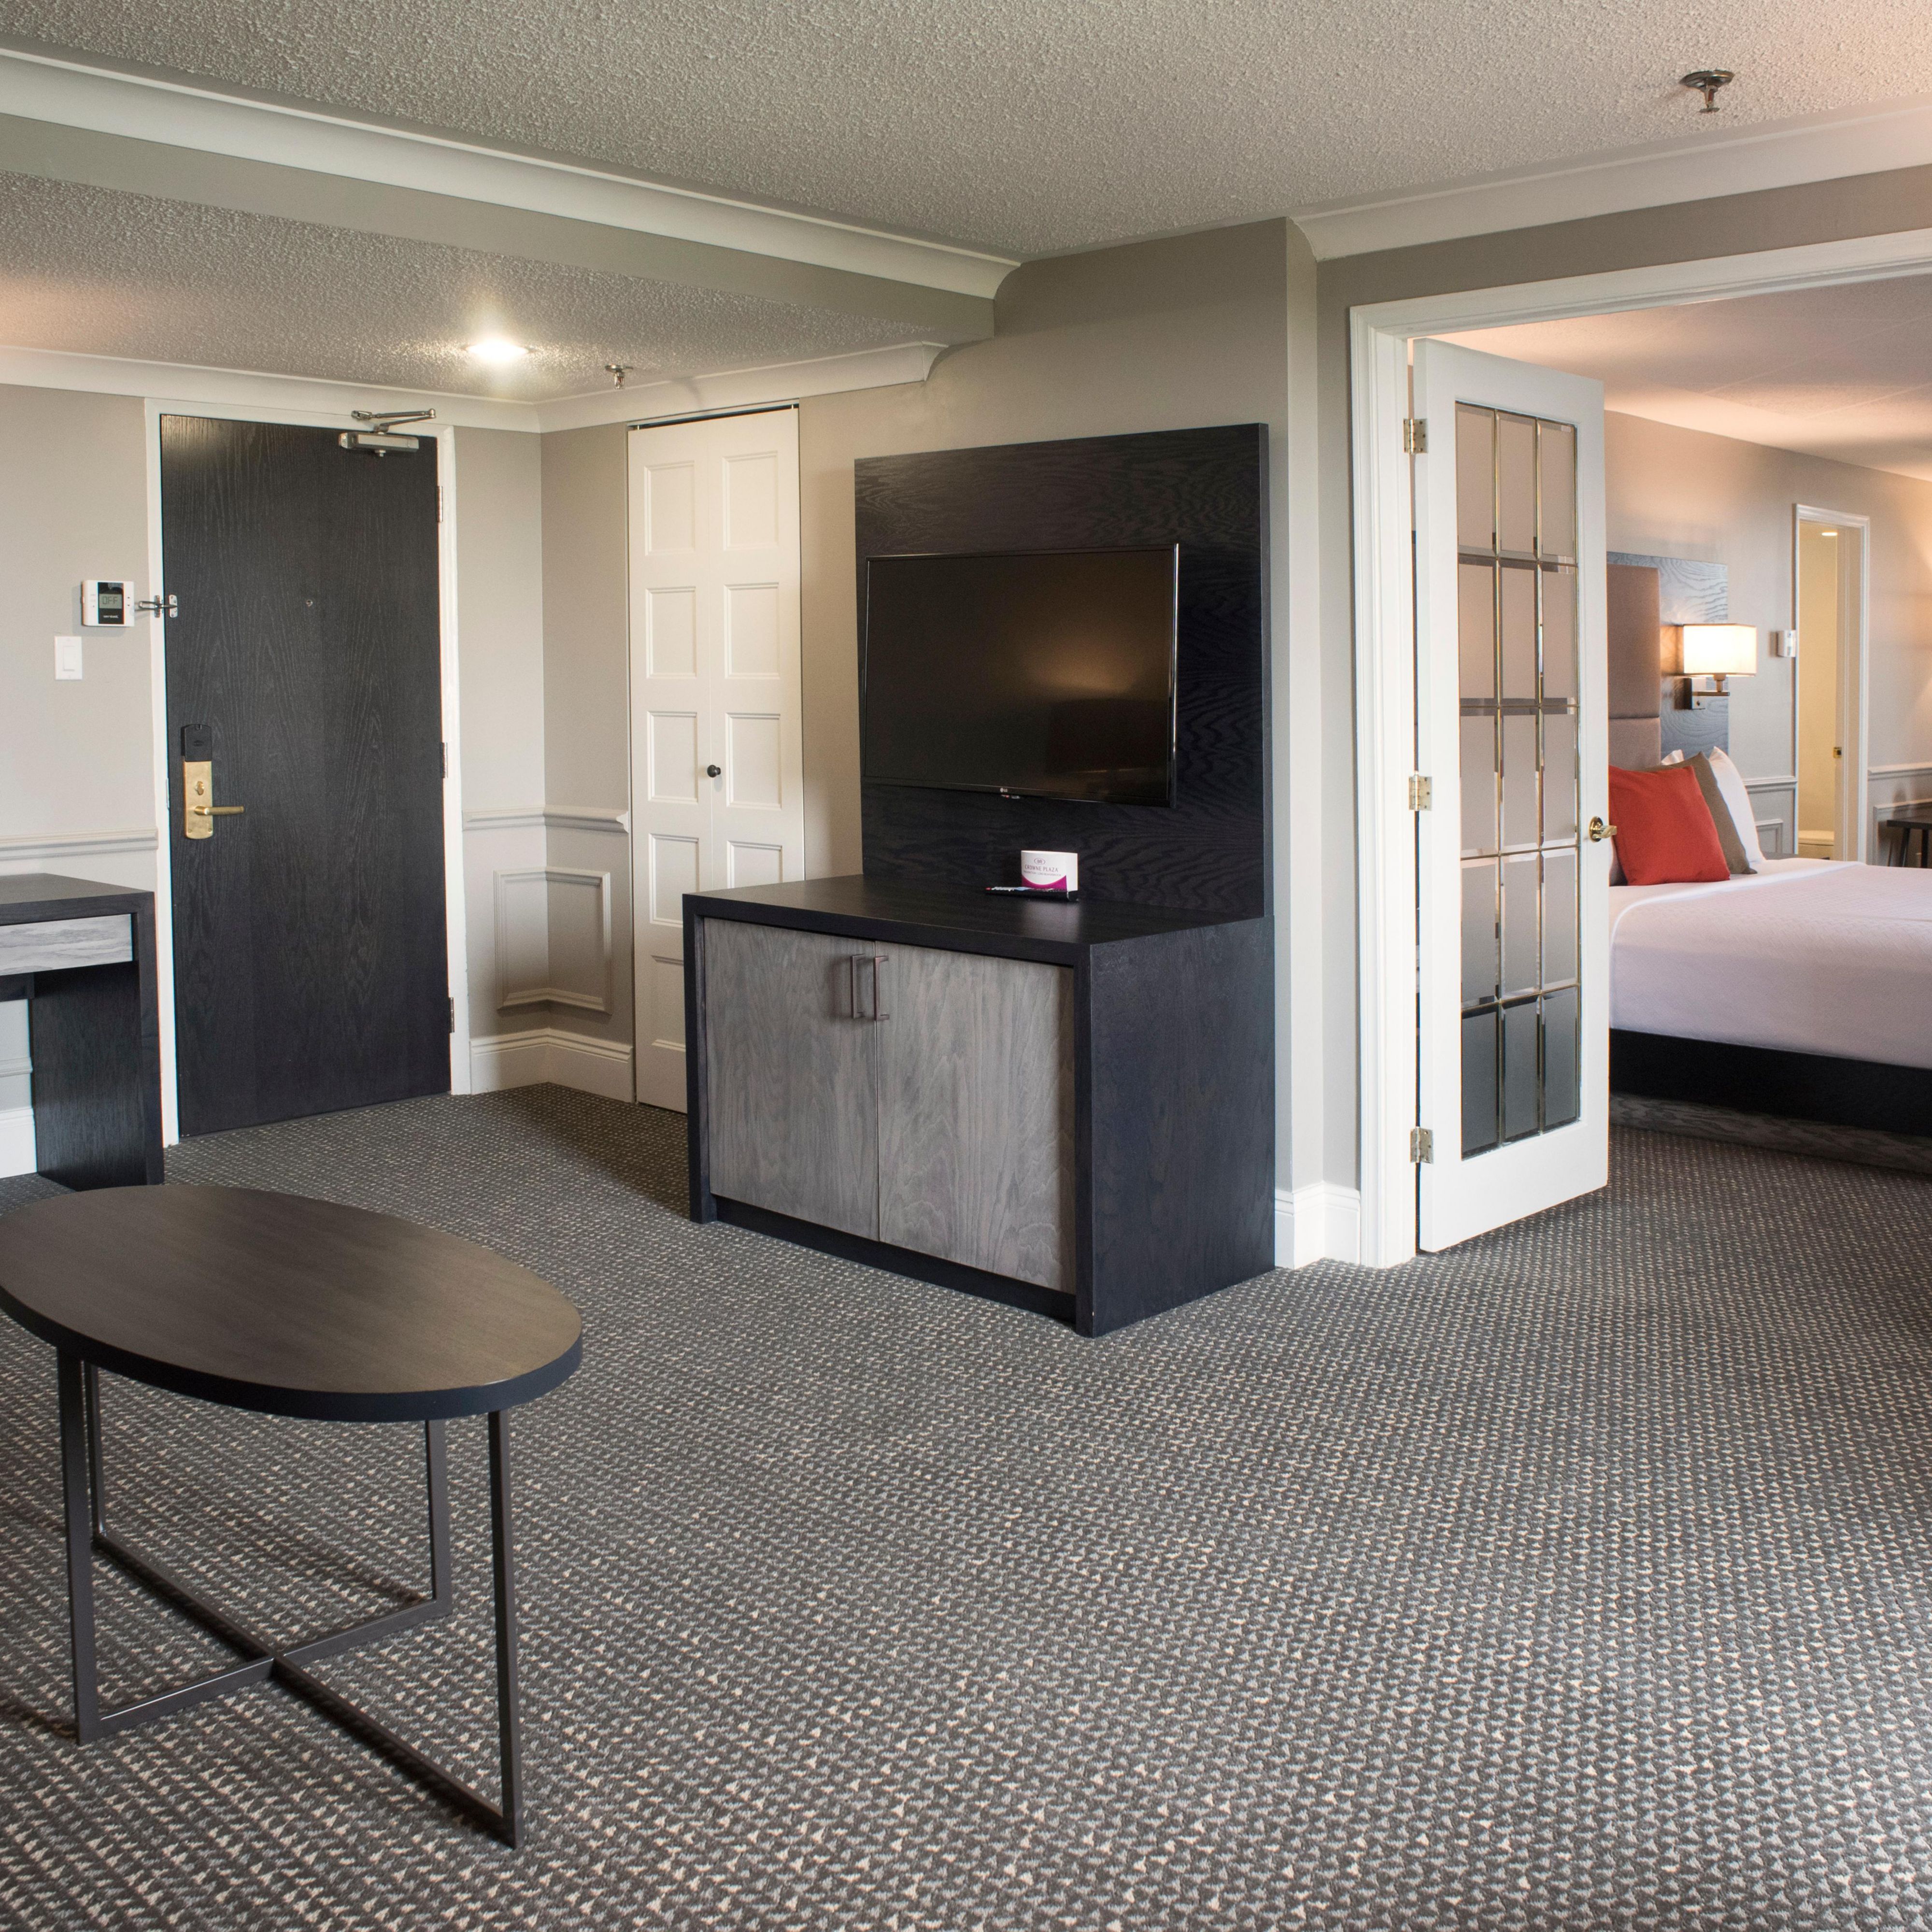 If you’re looking for extra space, book our Club Floor King Suite